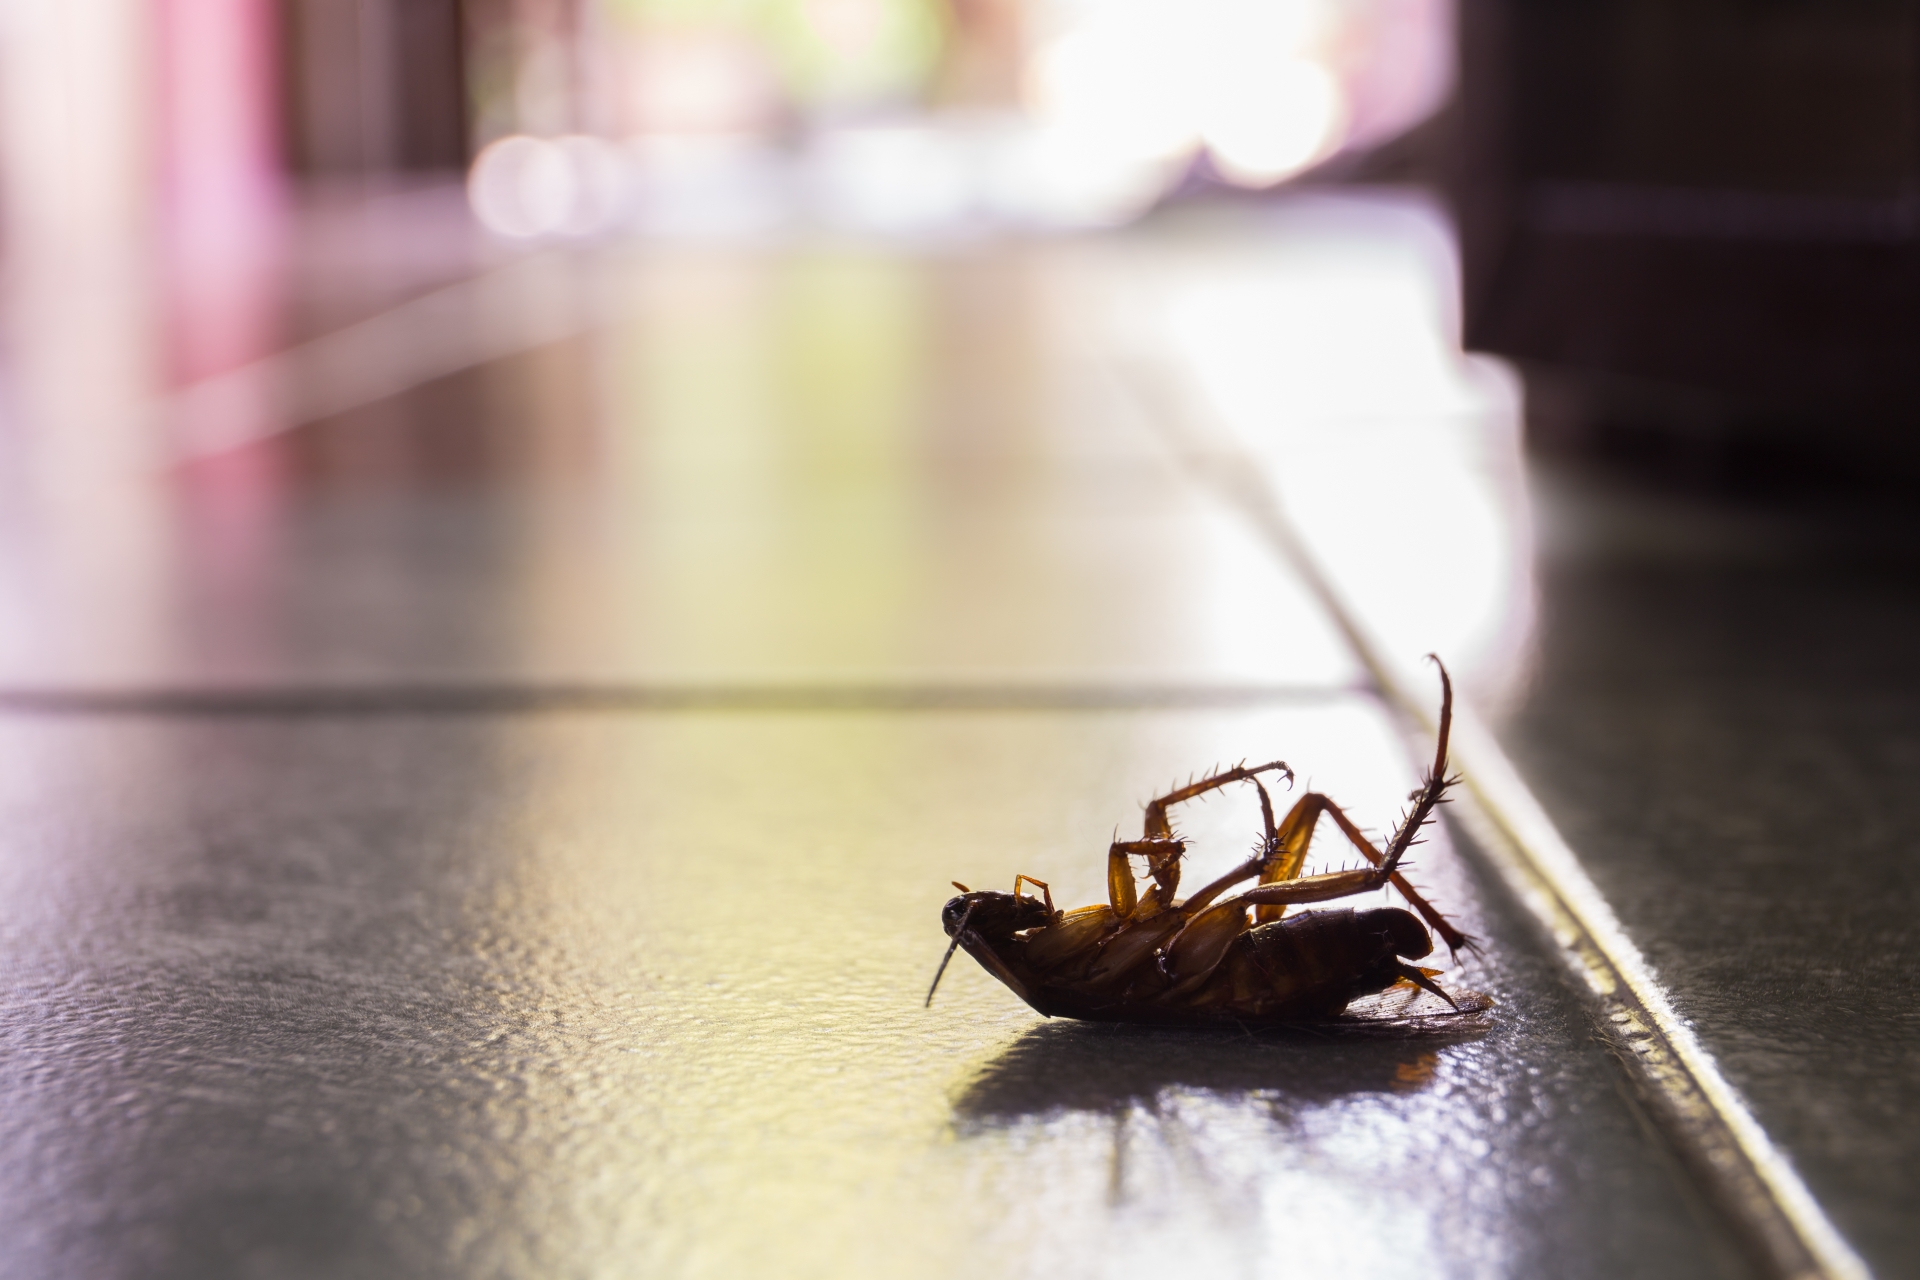 Cockroach Control, Pest Control in Wallington, SM6. Call Now 020 8166 9746